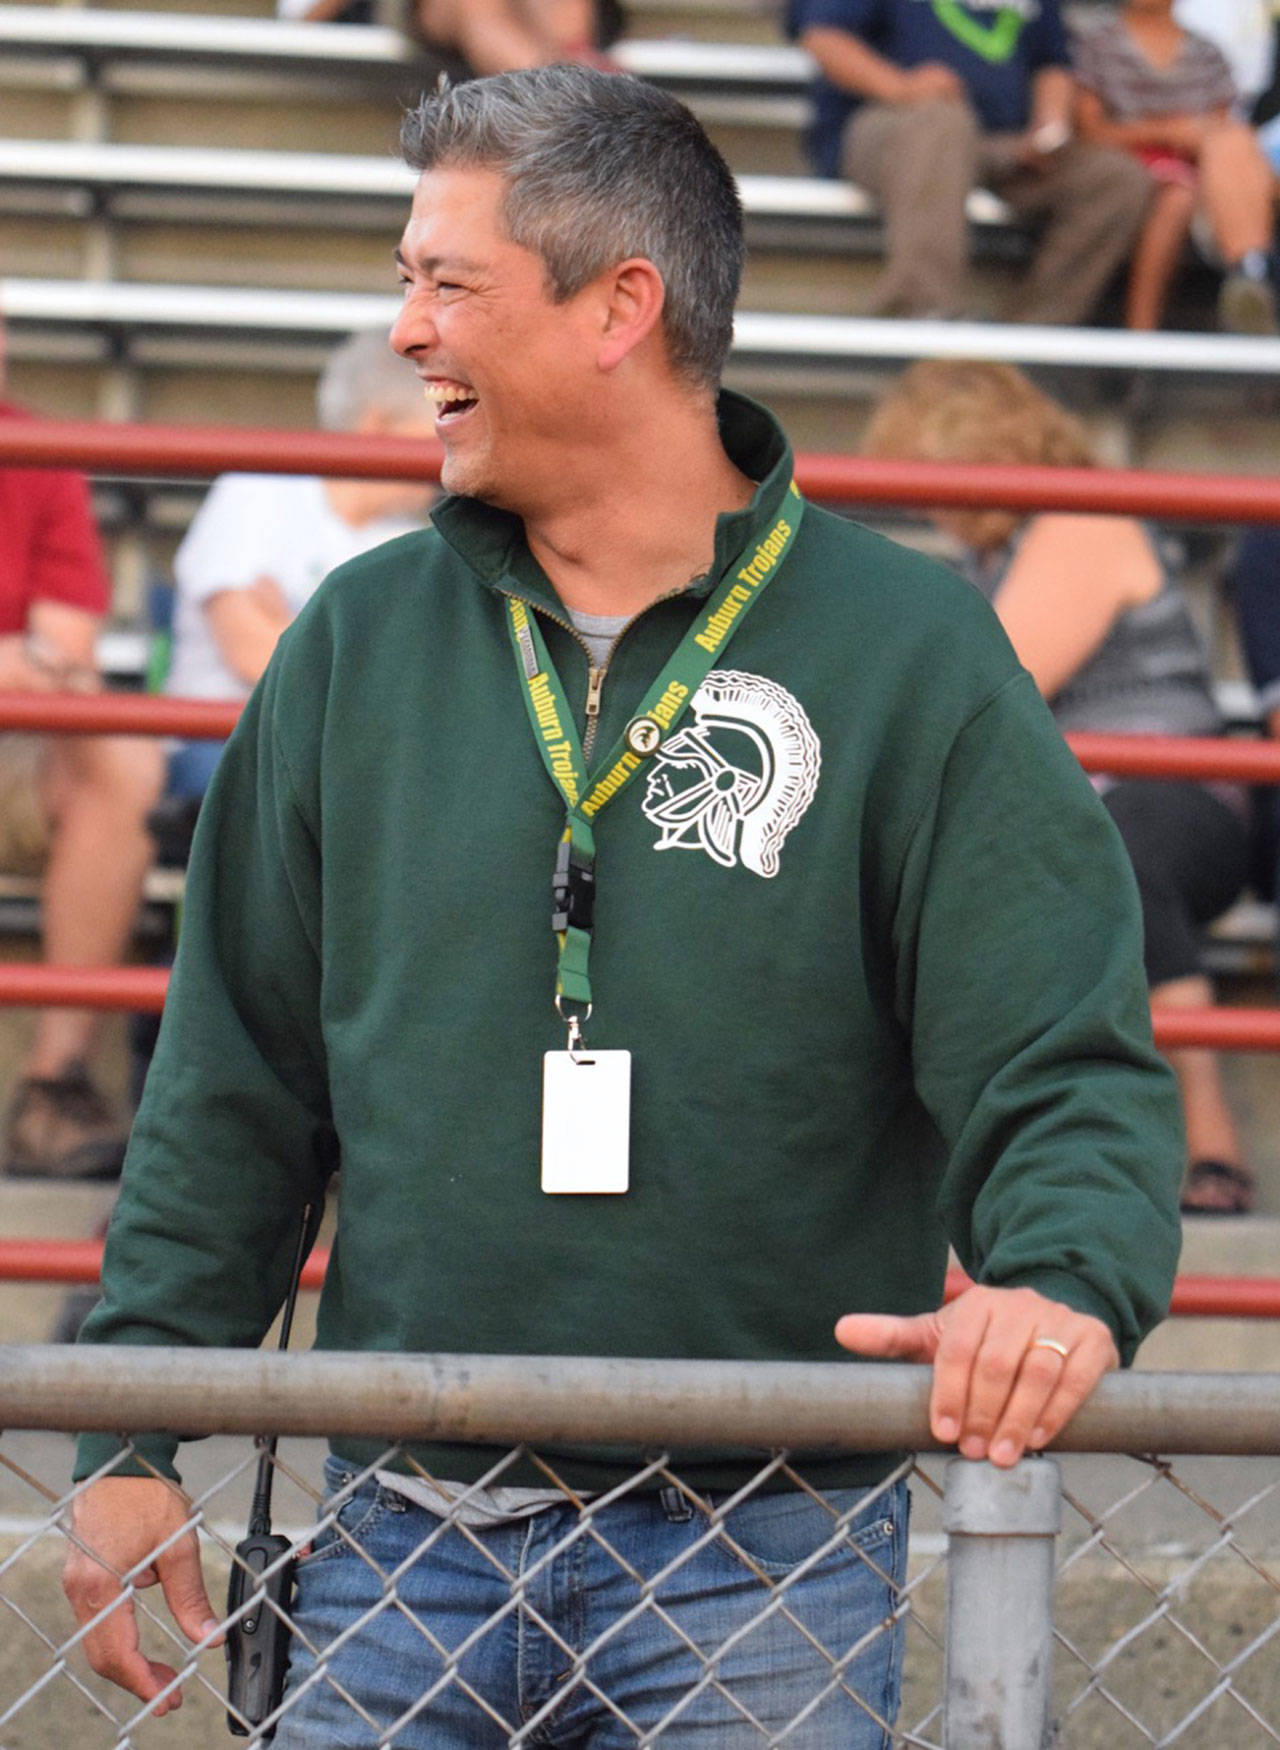 Jeff Gardner, Auburn High’s new principal, shares a laugh with others at a recent Trojans football game. The longtime teacher and coach is settling into his role at the high school. RACHEL CIAMPI, Auburn Reporter